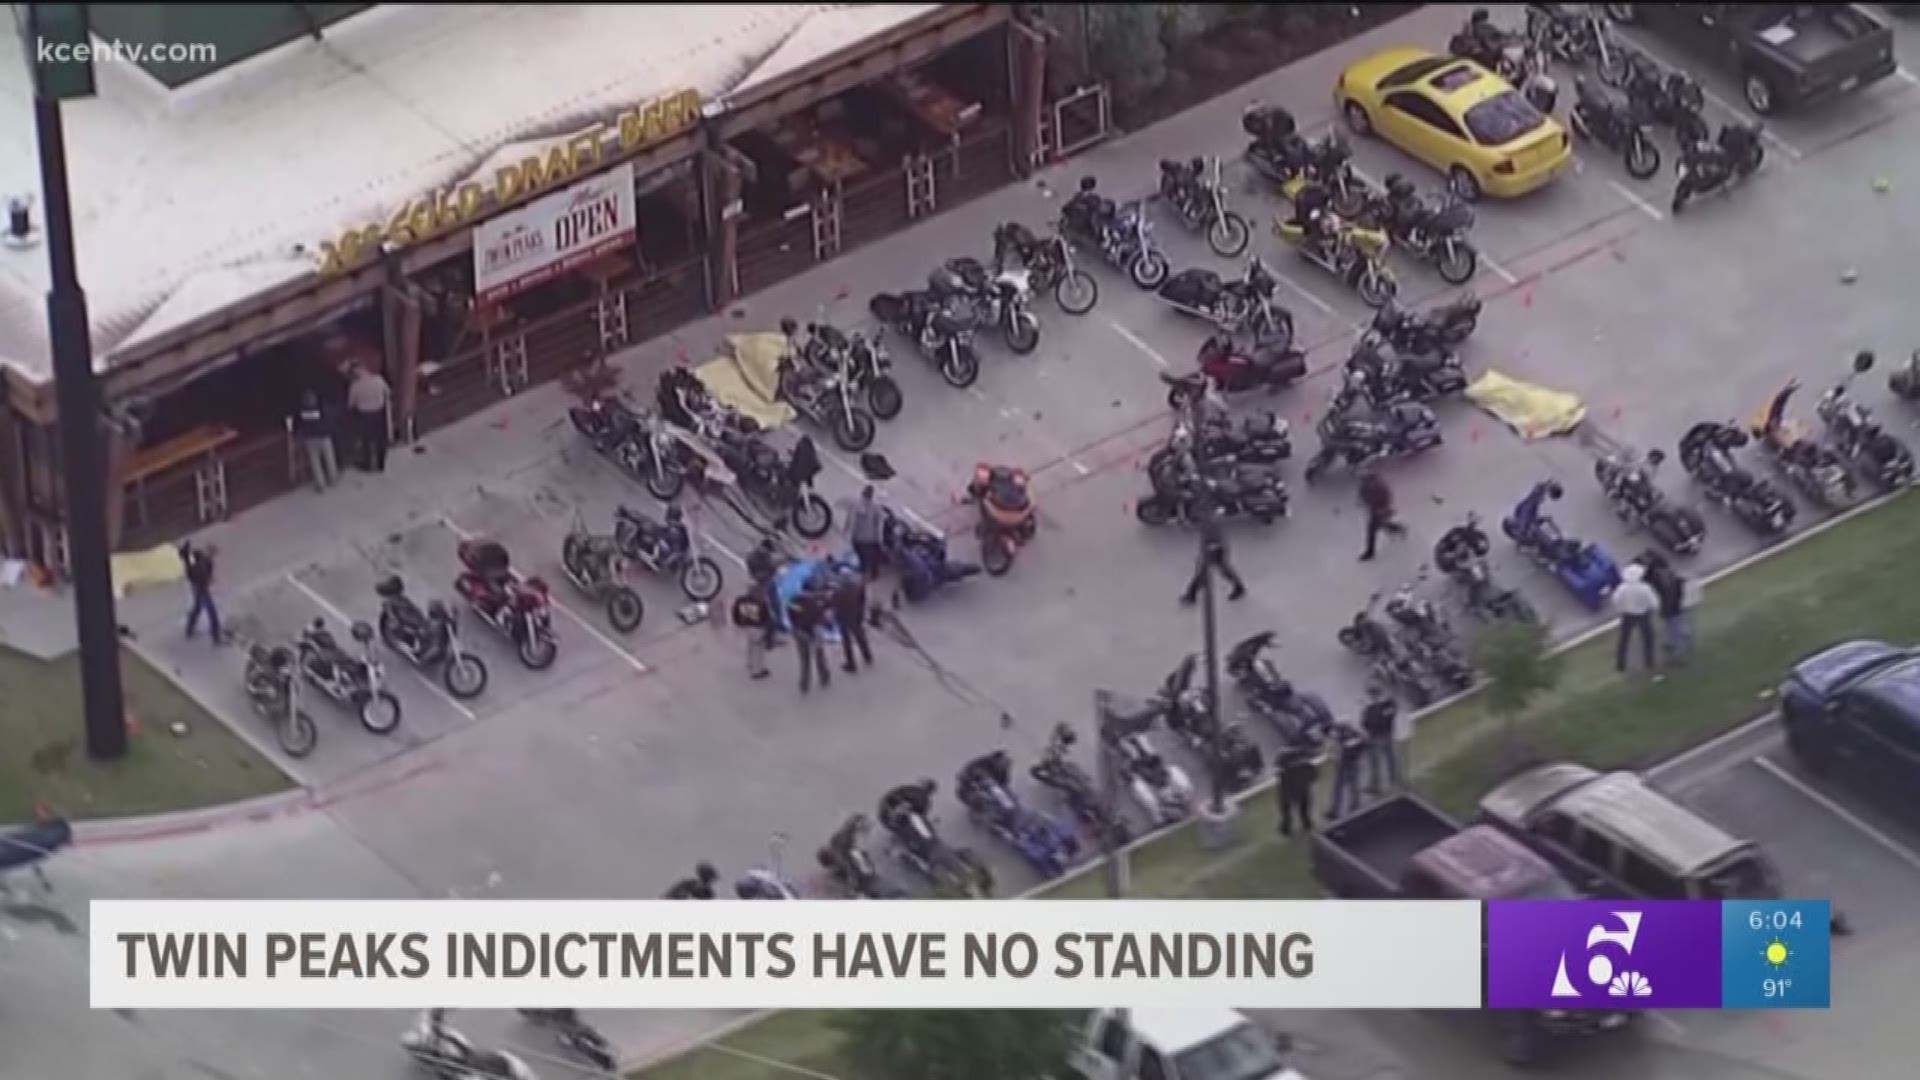 Lawyers for one of the Twin Peaks bikers still facing charges say the government didn't file paperwork properly meaning the new round of indictments in the case breaks Texas law and have no legal standing. 